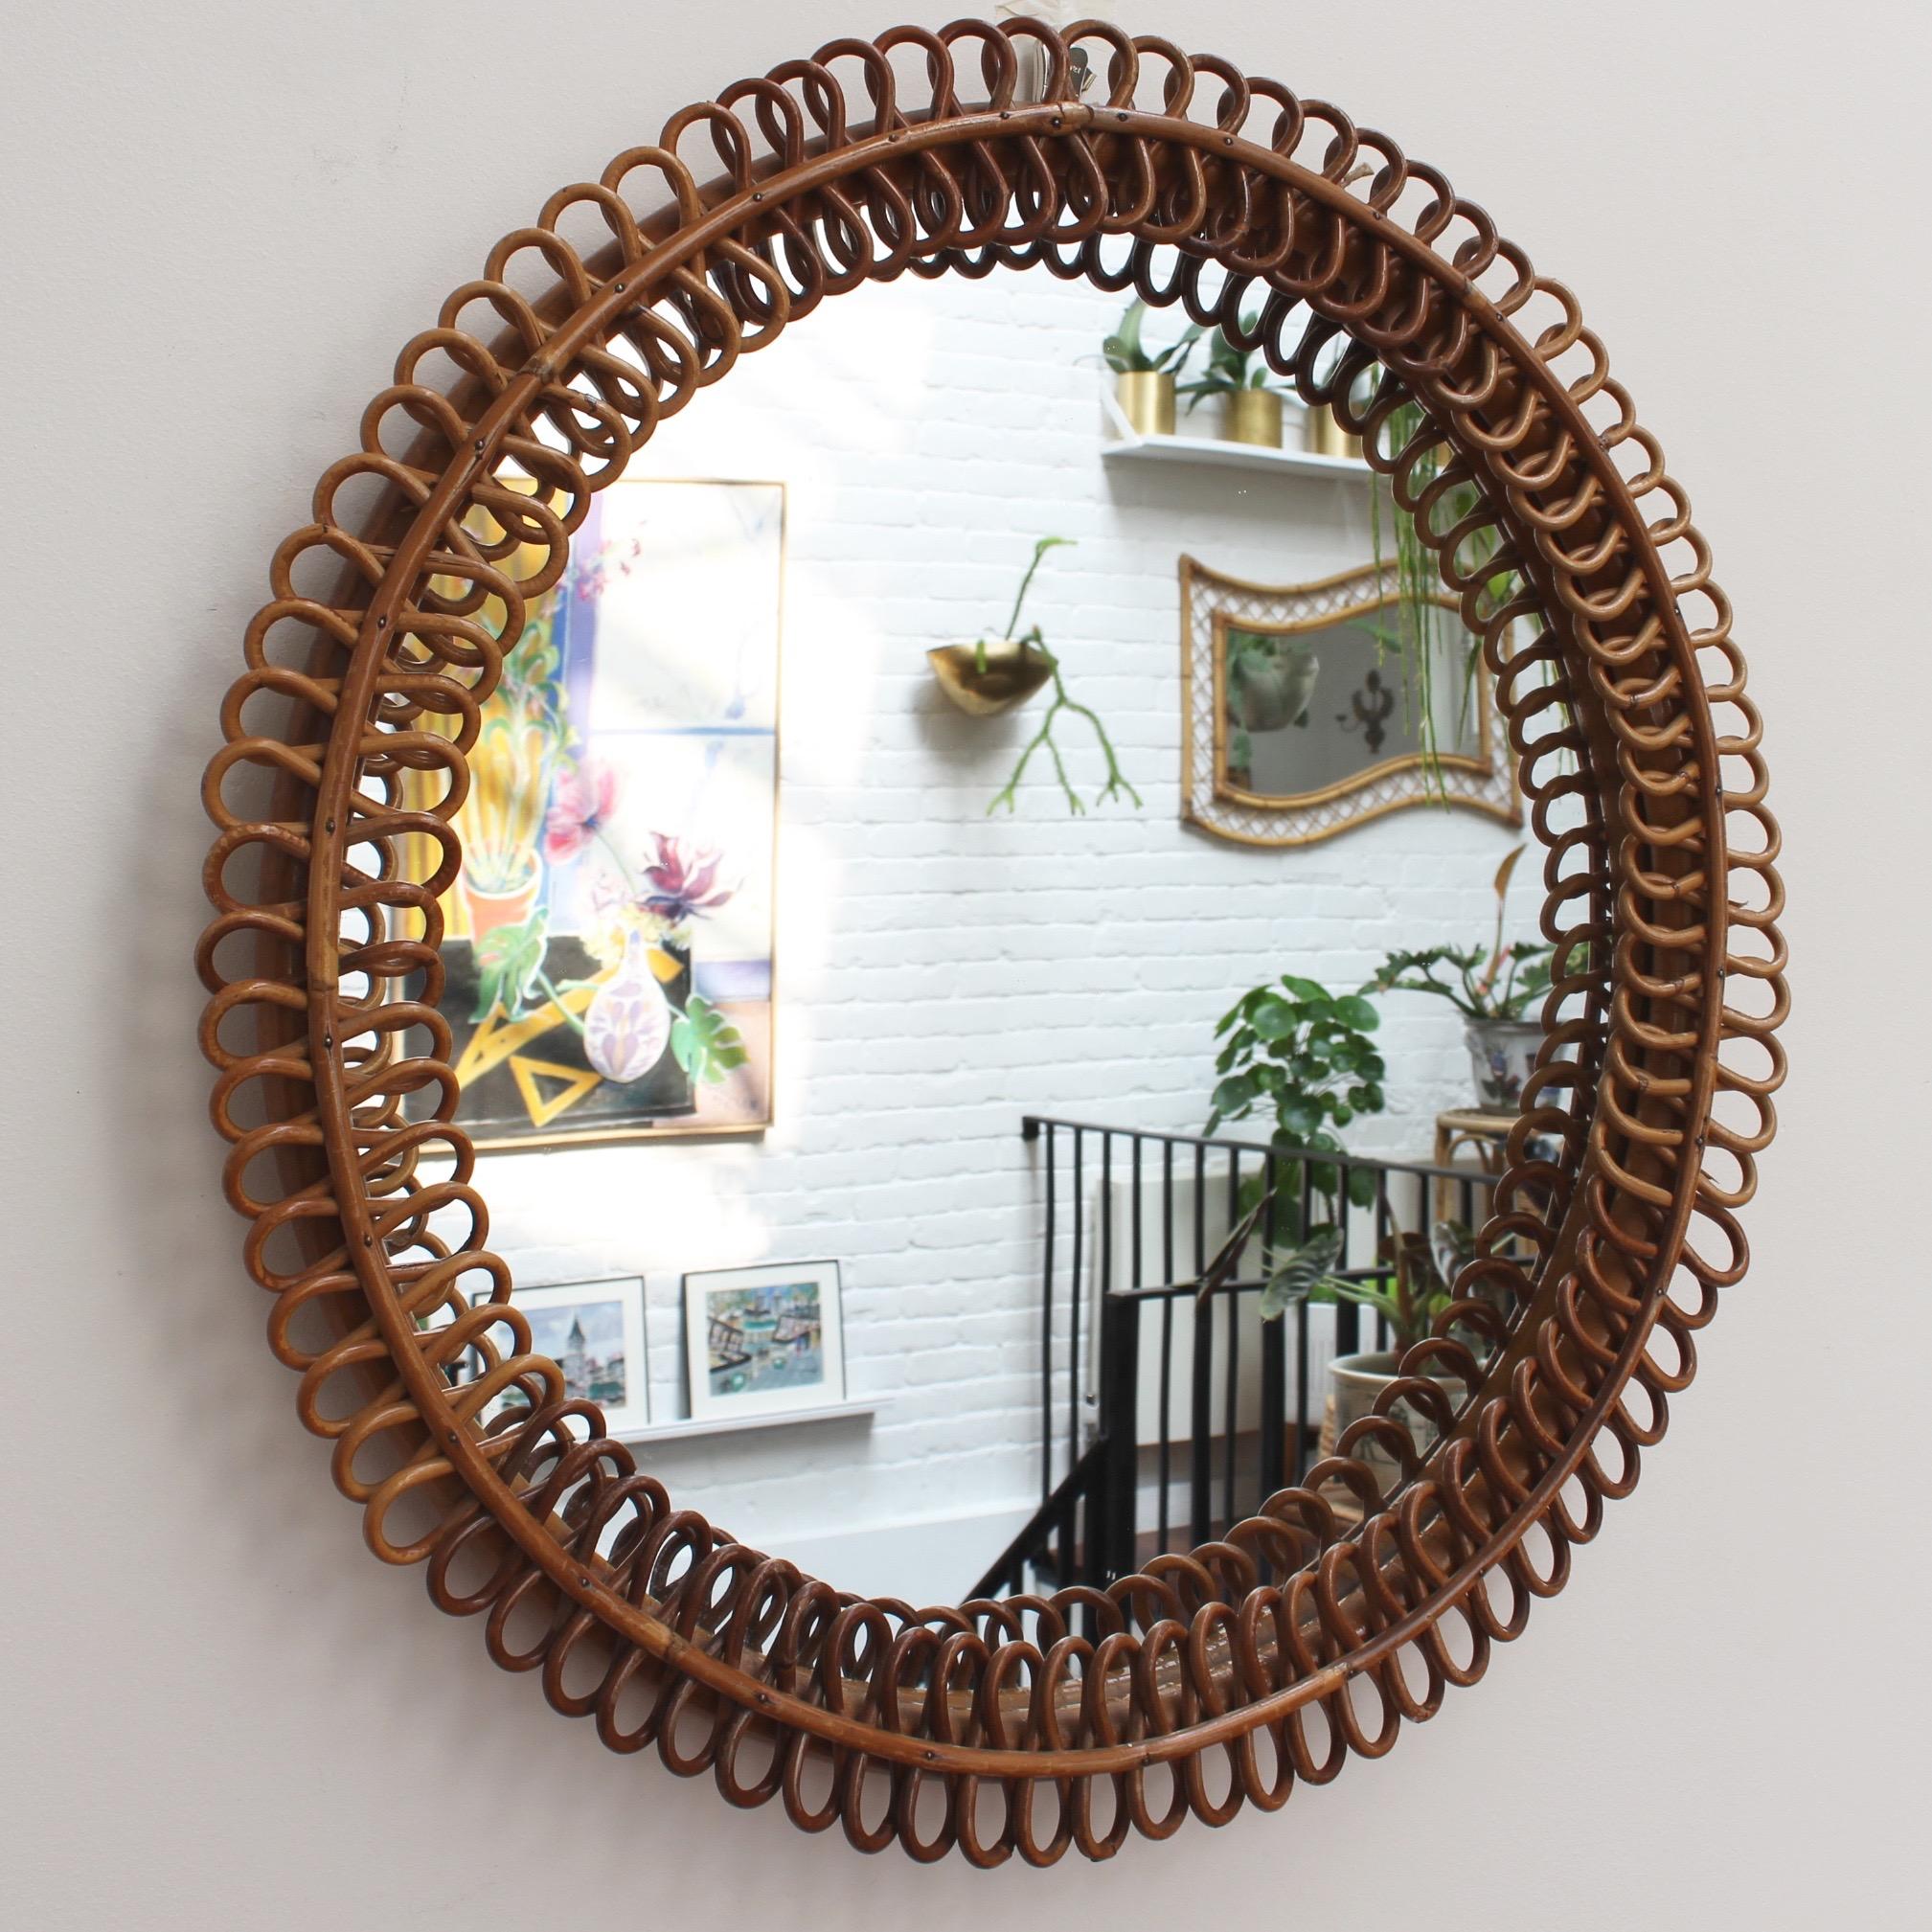 Italian rattan round wall mirror (circa 1960s). This mirror has a very delightful circular sun shape framed with rattan figure-eight resembling pretzels. There is a characterful, aged patina on the mirror frame and overall, the piece is in good